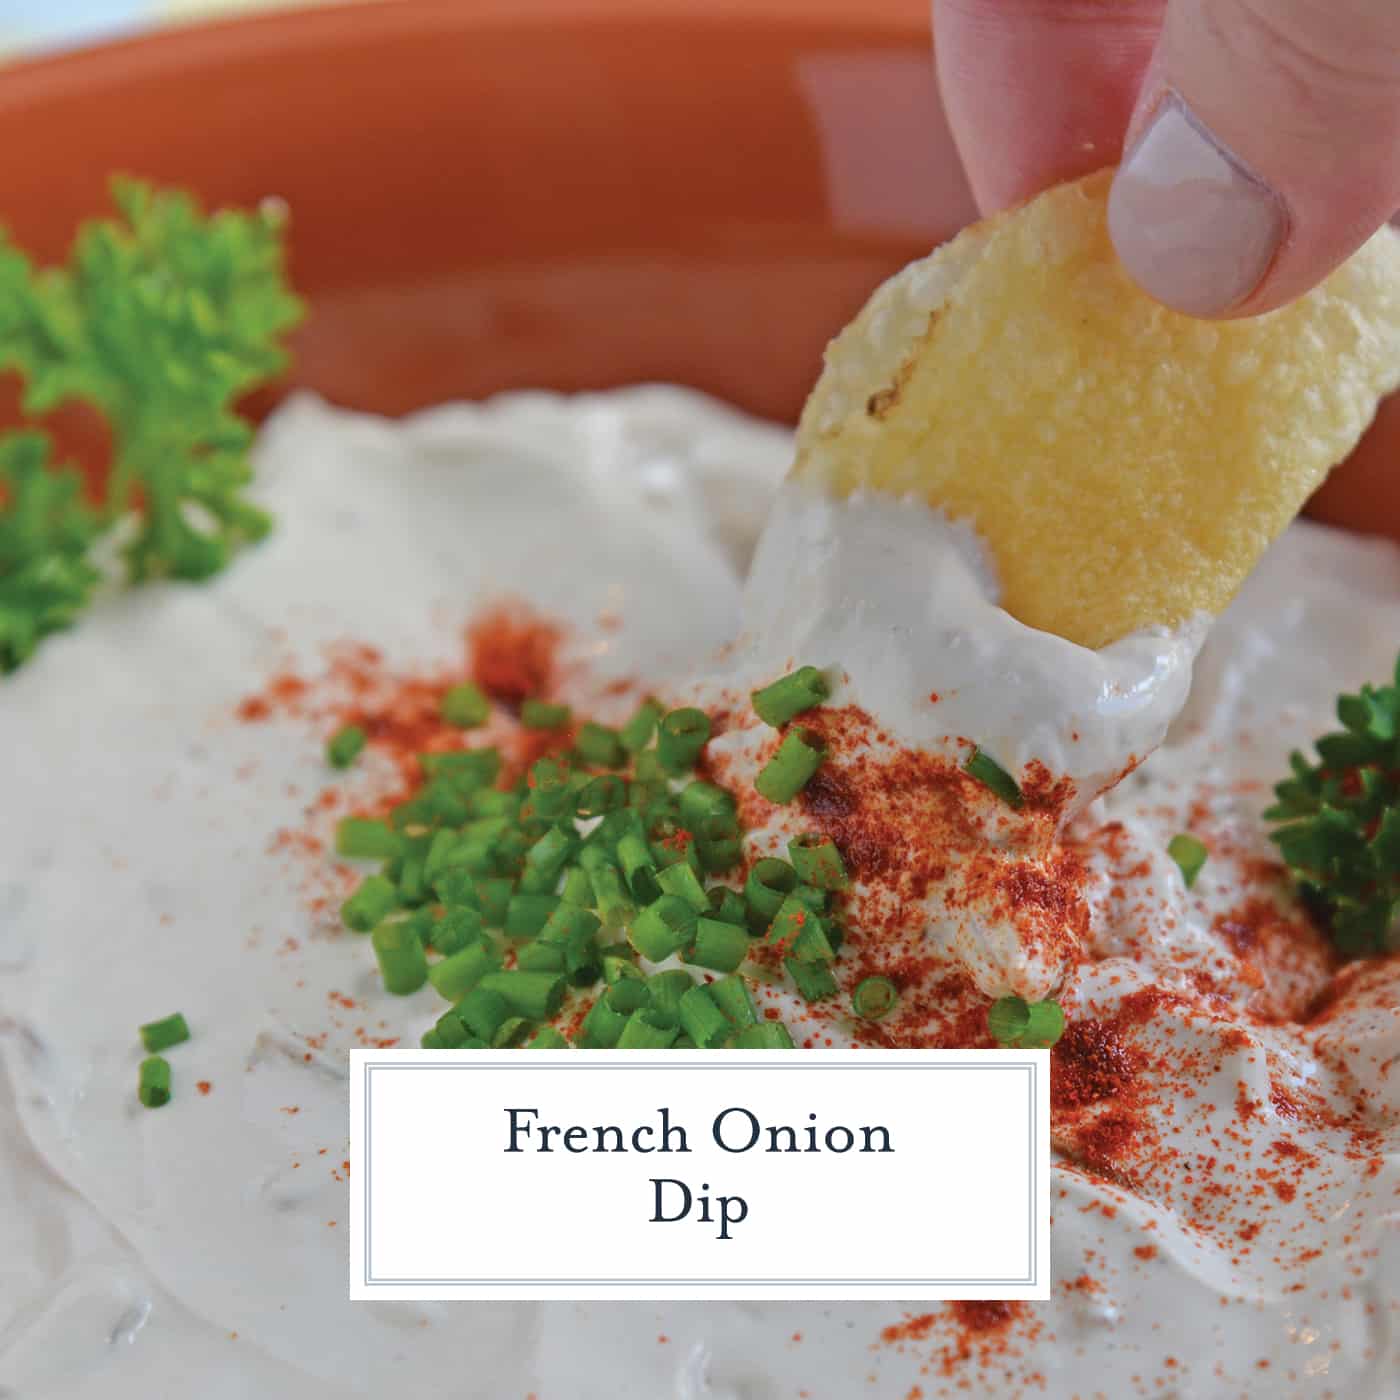 This French Onion Dip requires just 3 main ingredients and 5 minutes of prep. You'll never buy sour cream and onion dip from the store again! #frenchoniondip #partydip www.savoryexperiments.com